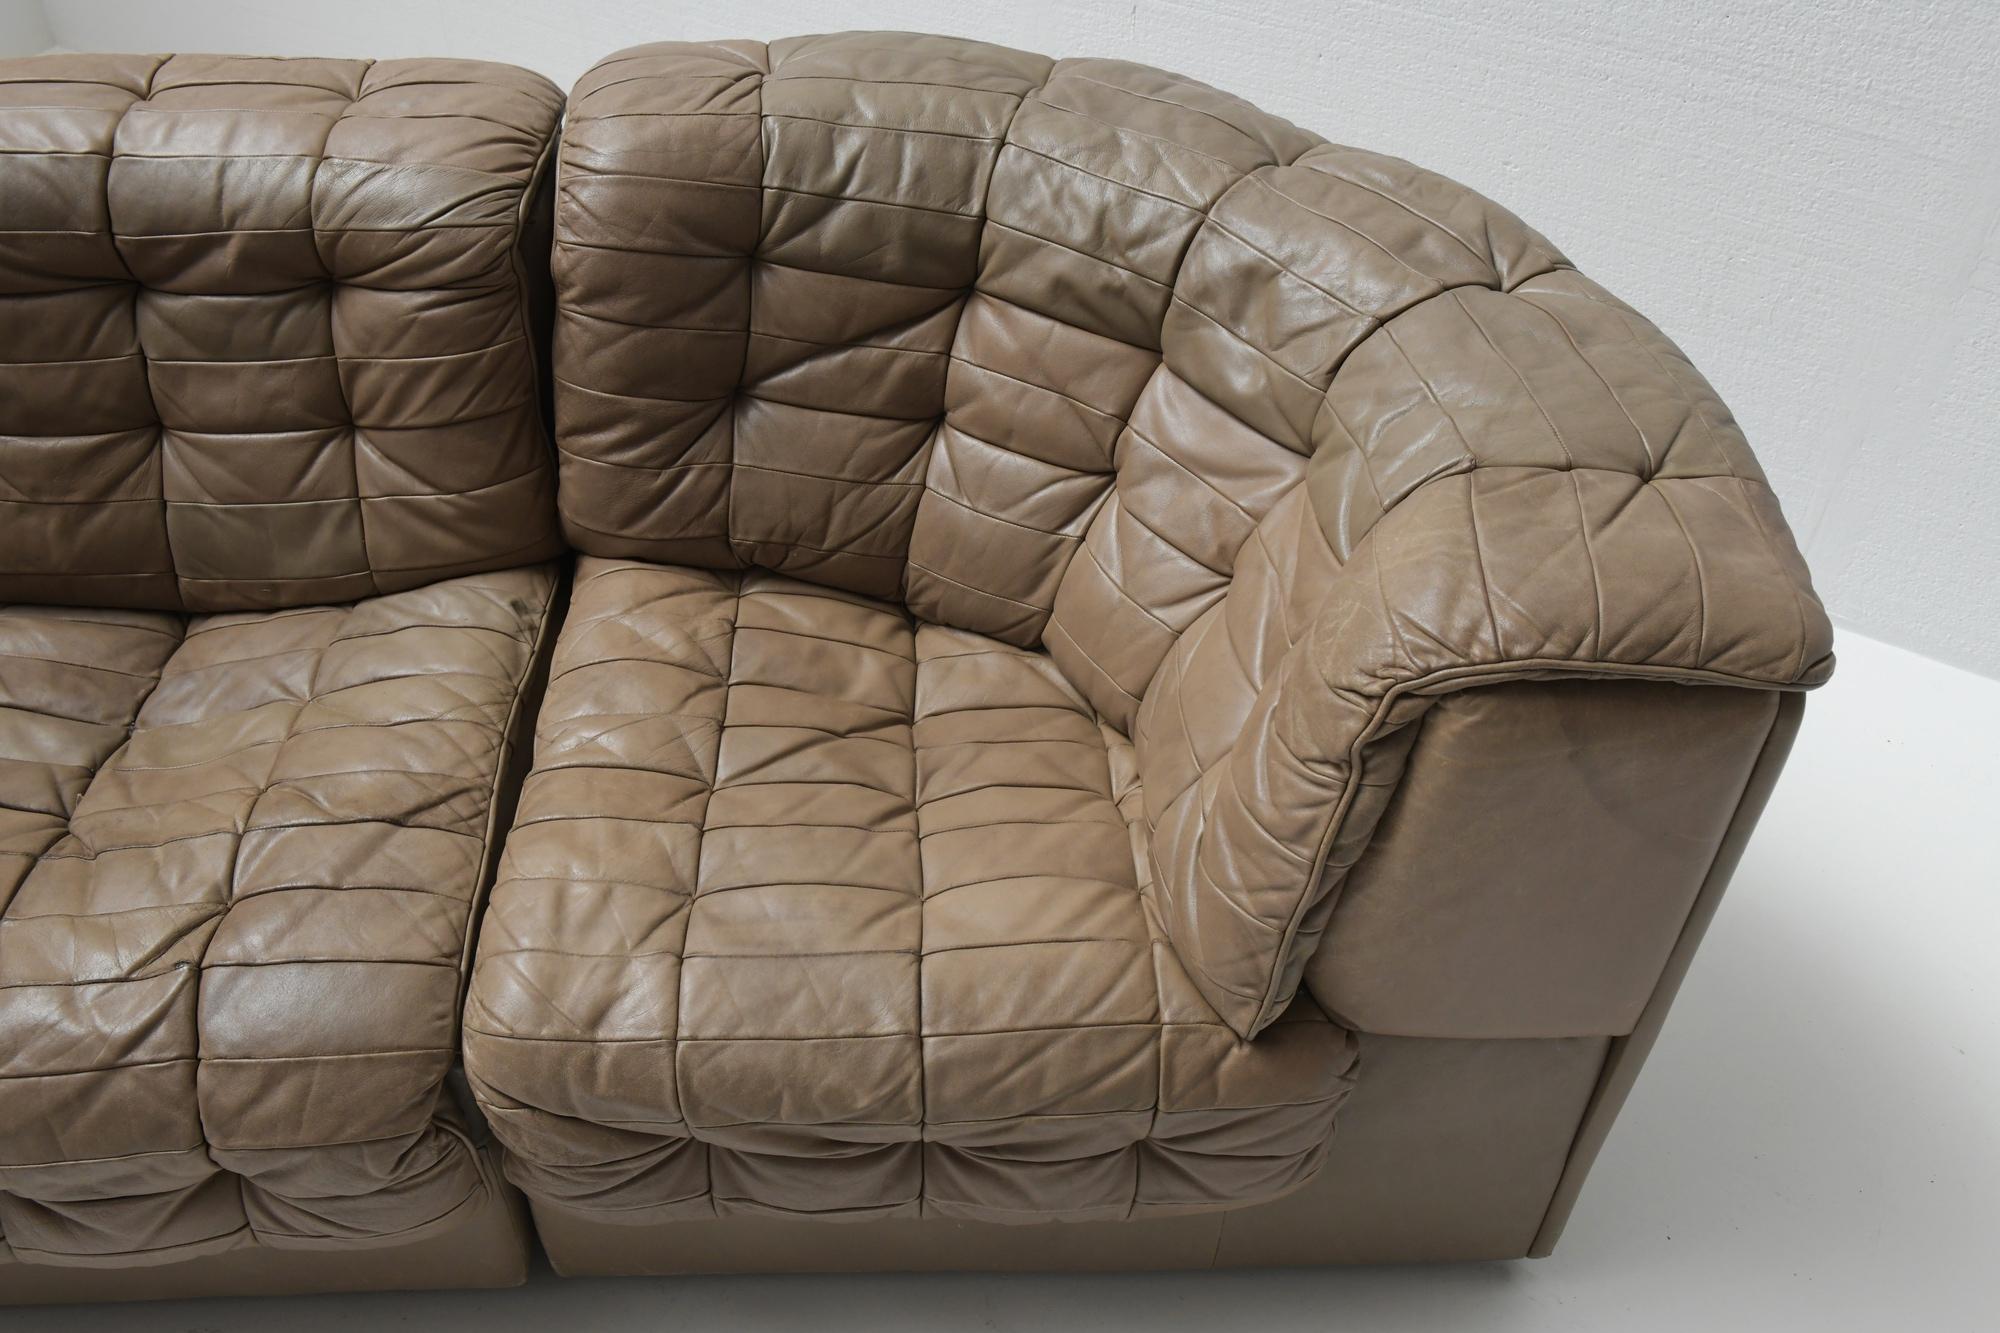 Ds 11 Modular Sofa in Brown Patchwork Leather by De Sede Team for De Sede Swiss For Sale 1